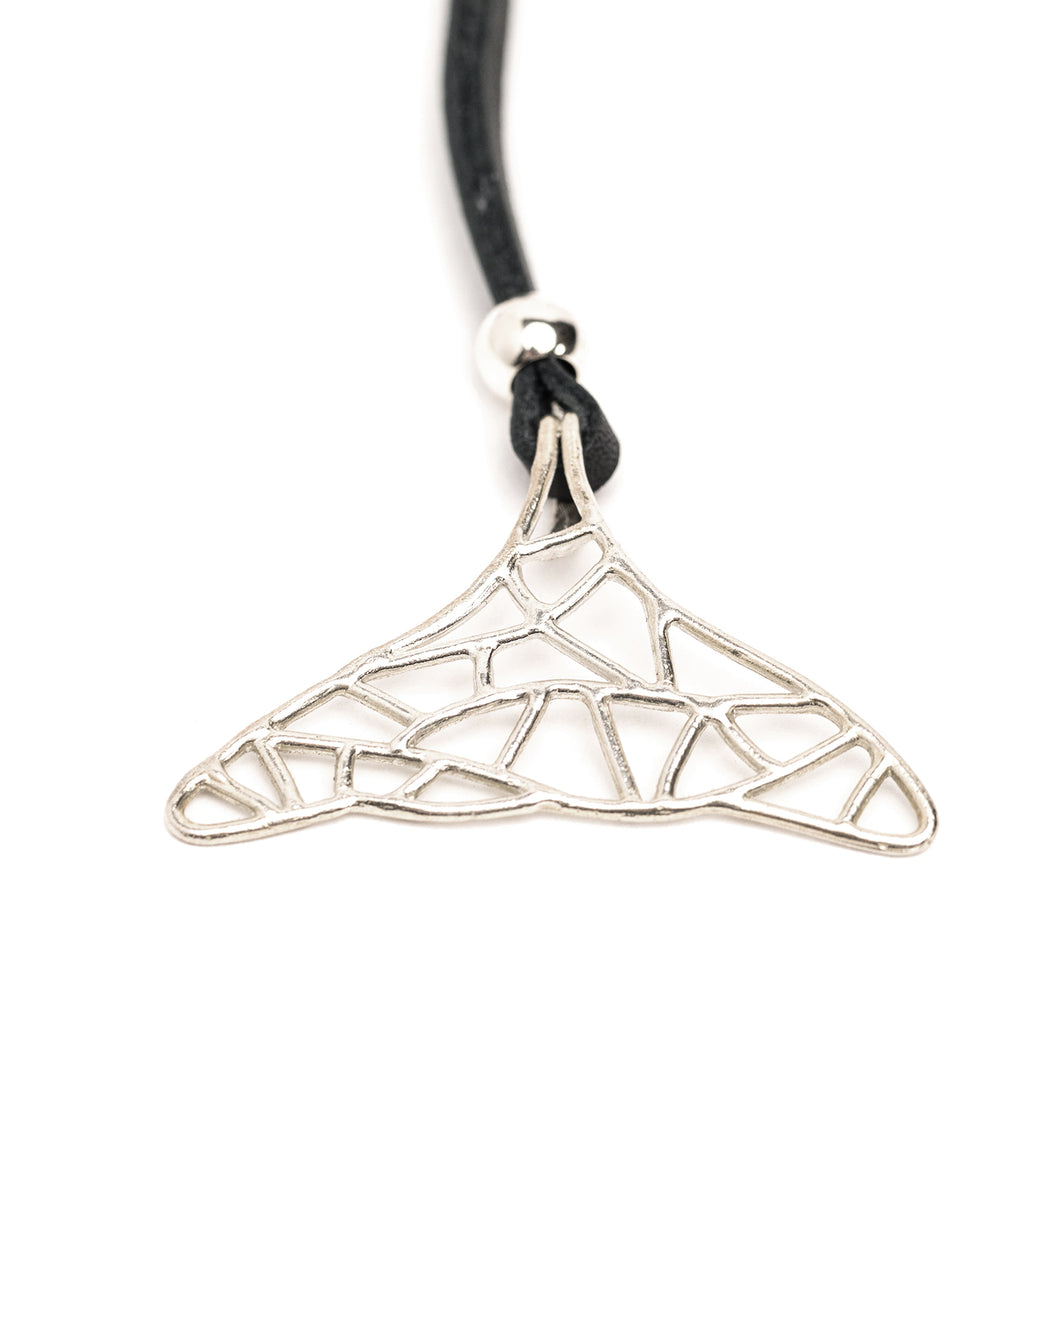 Nancy Miller x Whale Trust Whale Tail Necklace in Argentium Silver